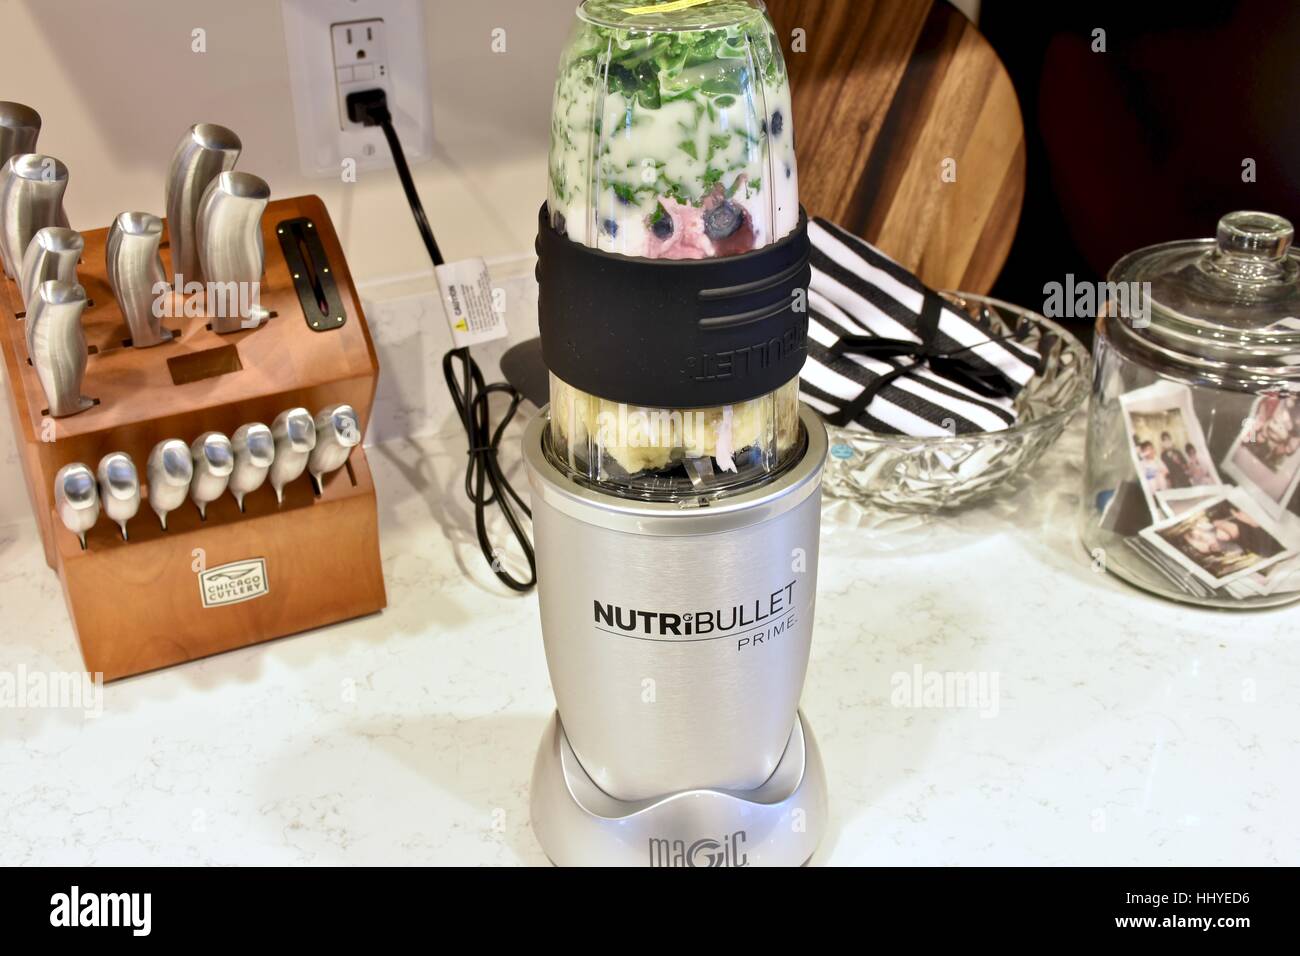 https://c8.alamy.com/comp/HHYED6/making-a-smoothie-with-the-nutribullet-blender-in-a-modern-kitchen-HHYED6.jpg